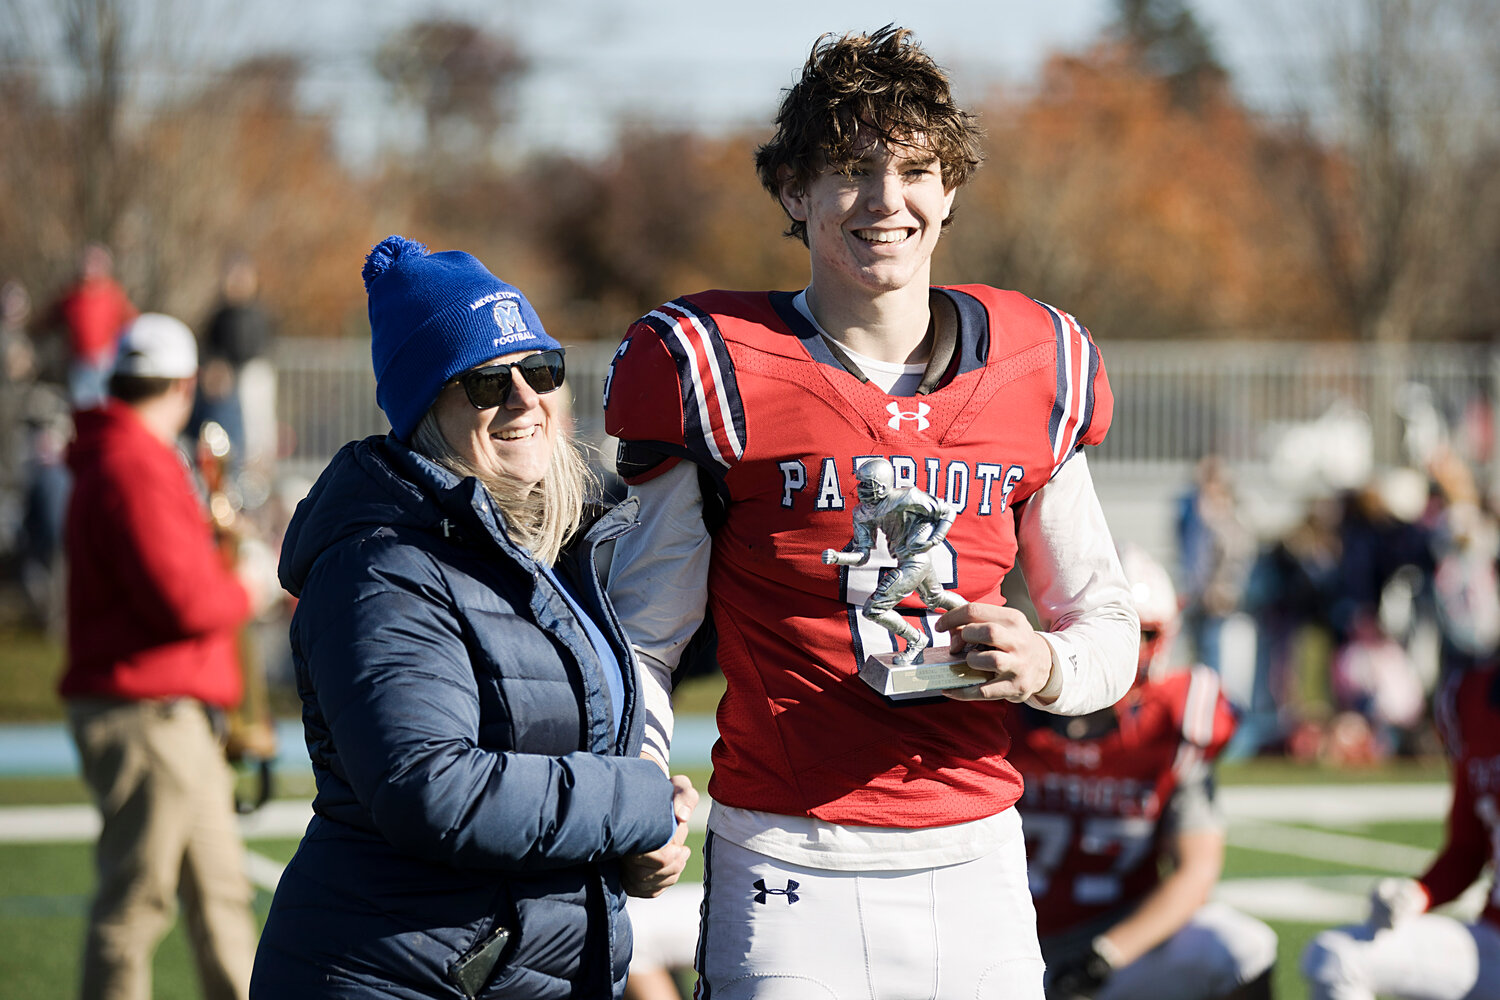 Middletown High School Principal Donna Sweet awards the Patriots’ Tyler Hurd with the game MVP trophy during the awards ceremony following the contest.